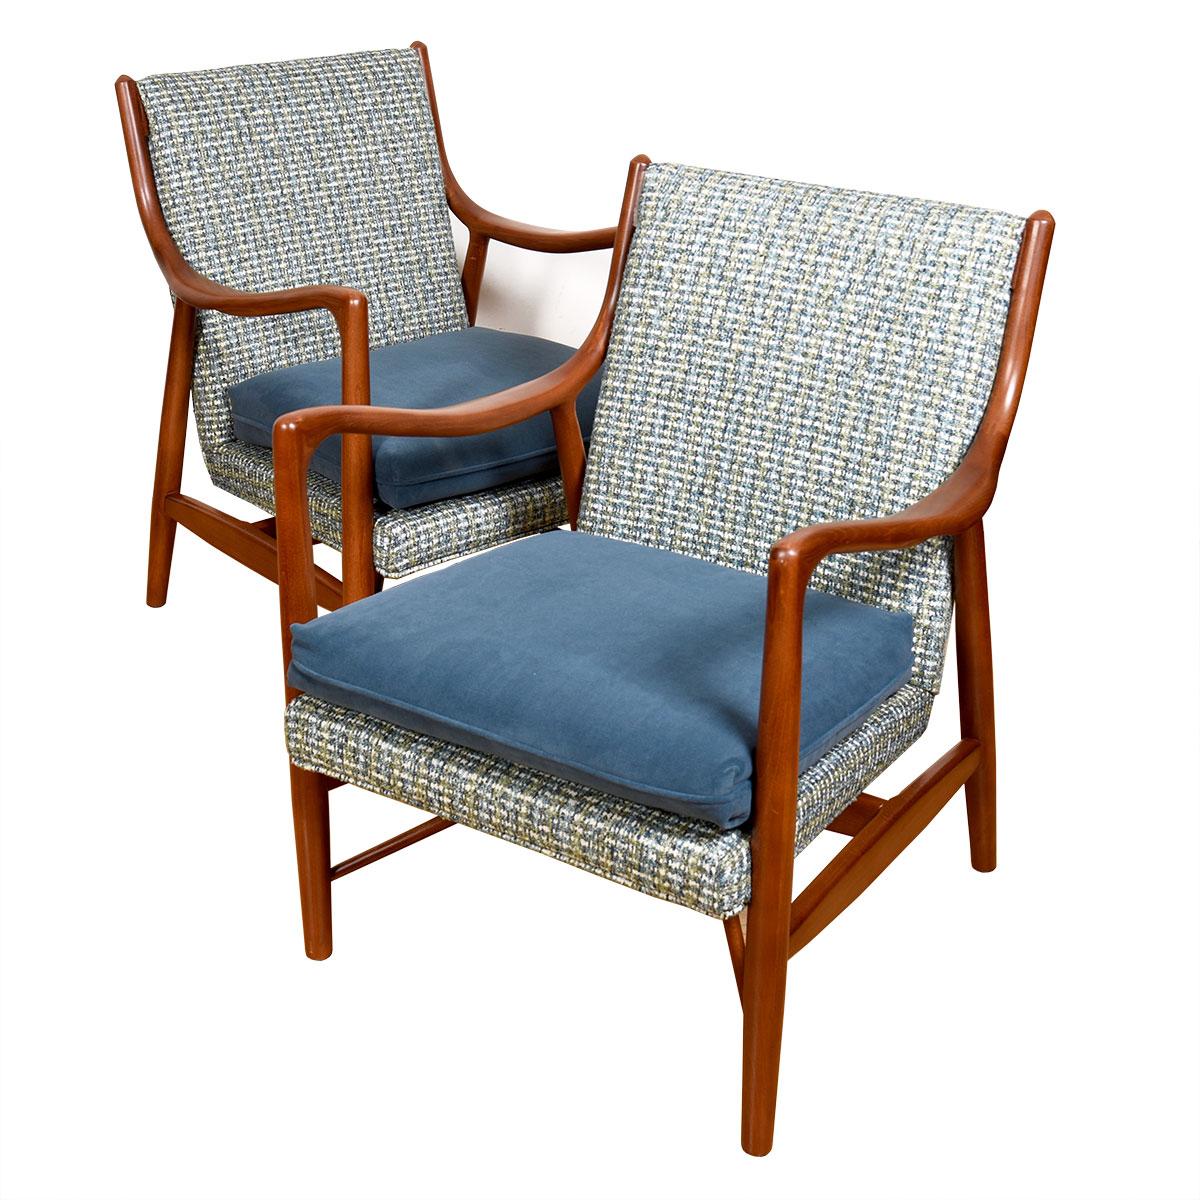 Pair of Finn Juhl Style Lounge Chairs
 
 Additional information:
 Material: Teak, Upholstery
 Featured at Kensington:
 Wonderful pair of chairs in the style of Finn Juhl - so good they fool a lot of people!
 Gorgeous lines, especially on the